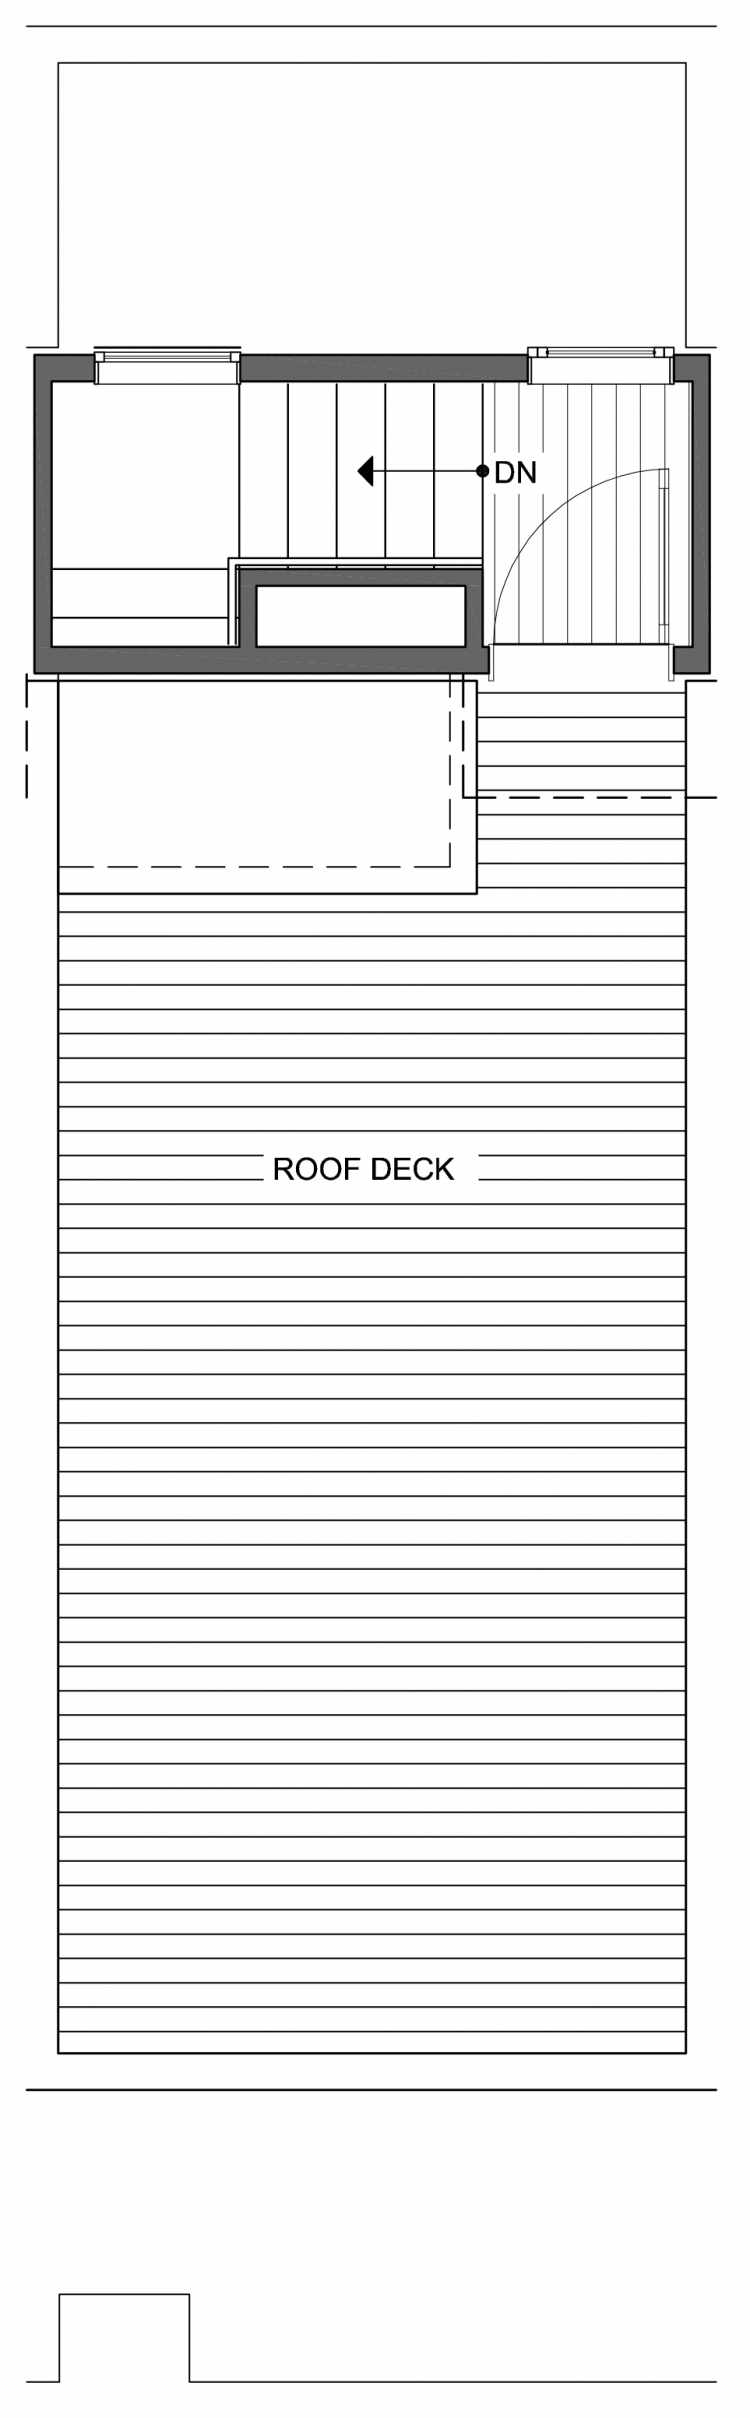 Roof Deck Floor Plan of 806F N 46th St, One of the Nino 15 East Townhomes by Isola Homes